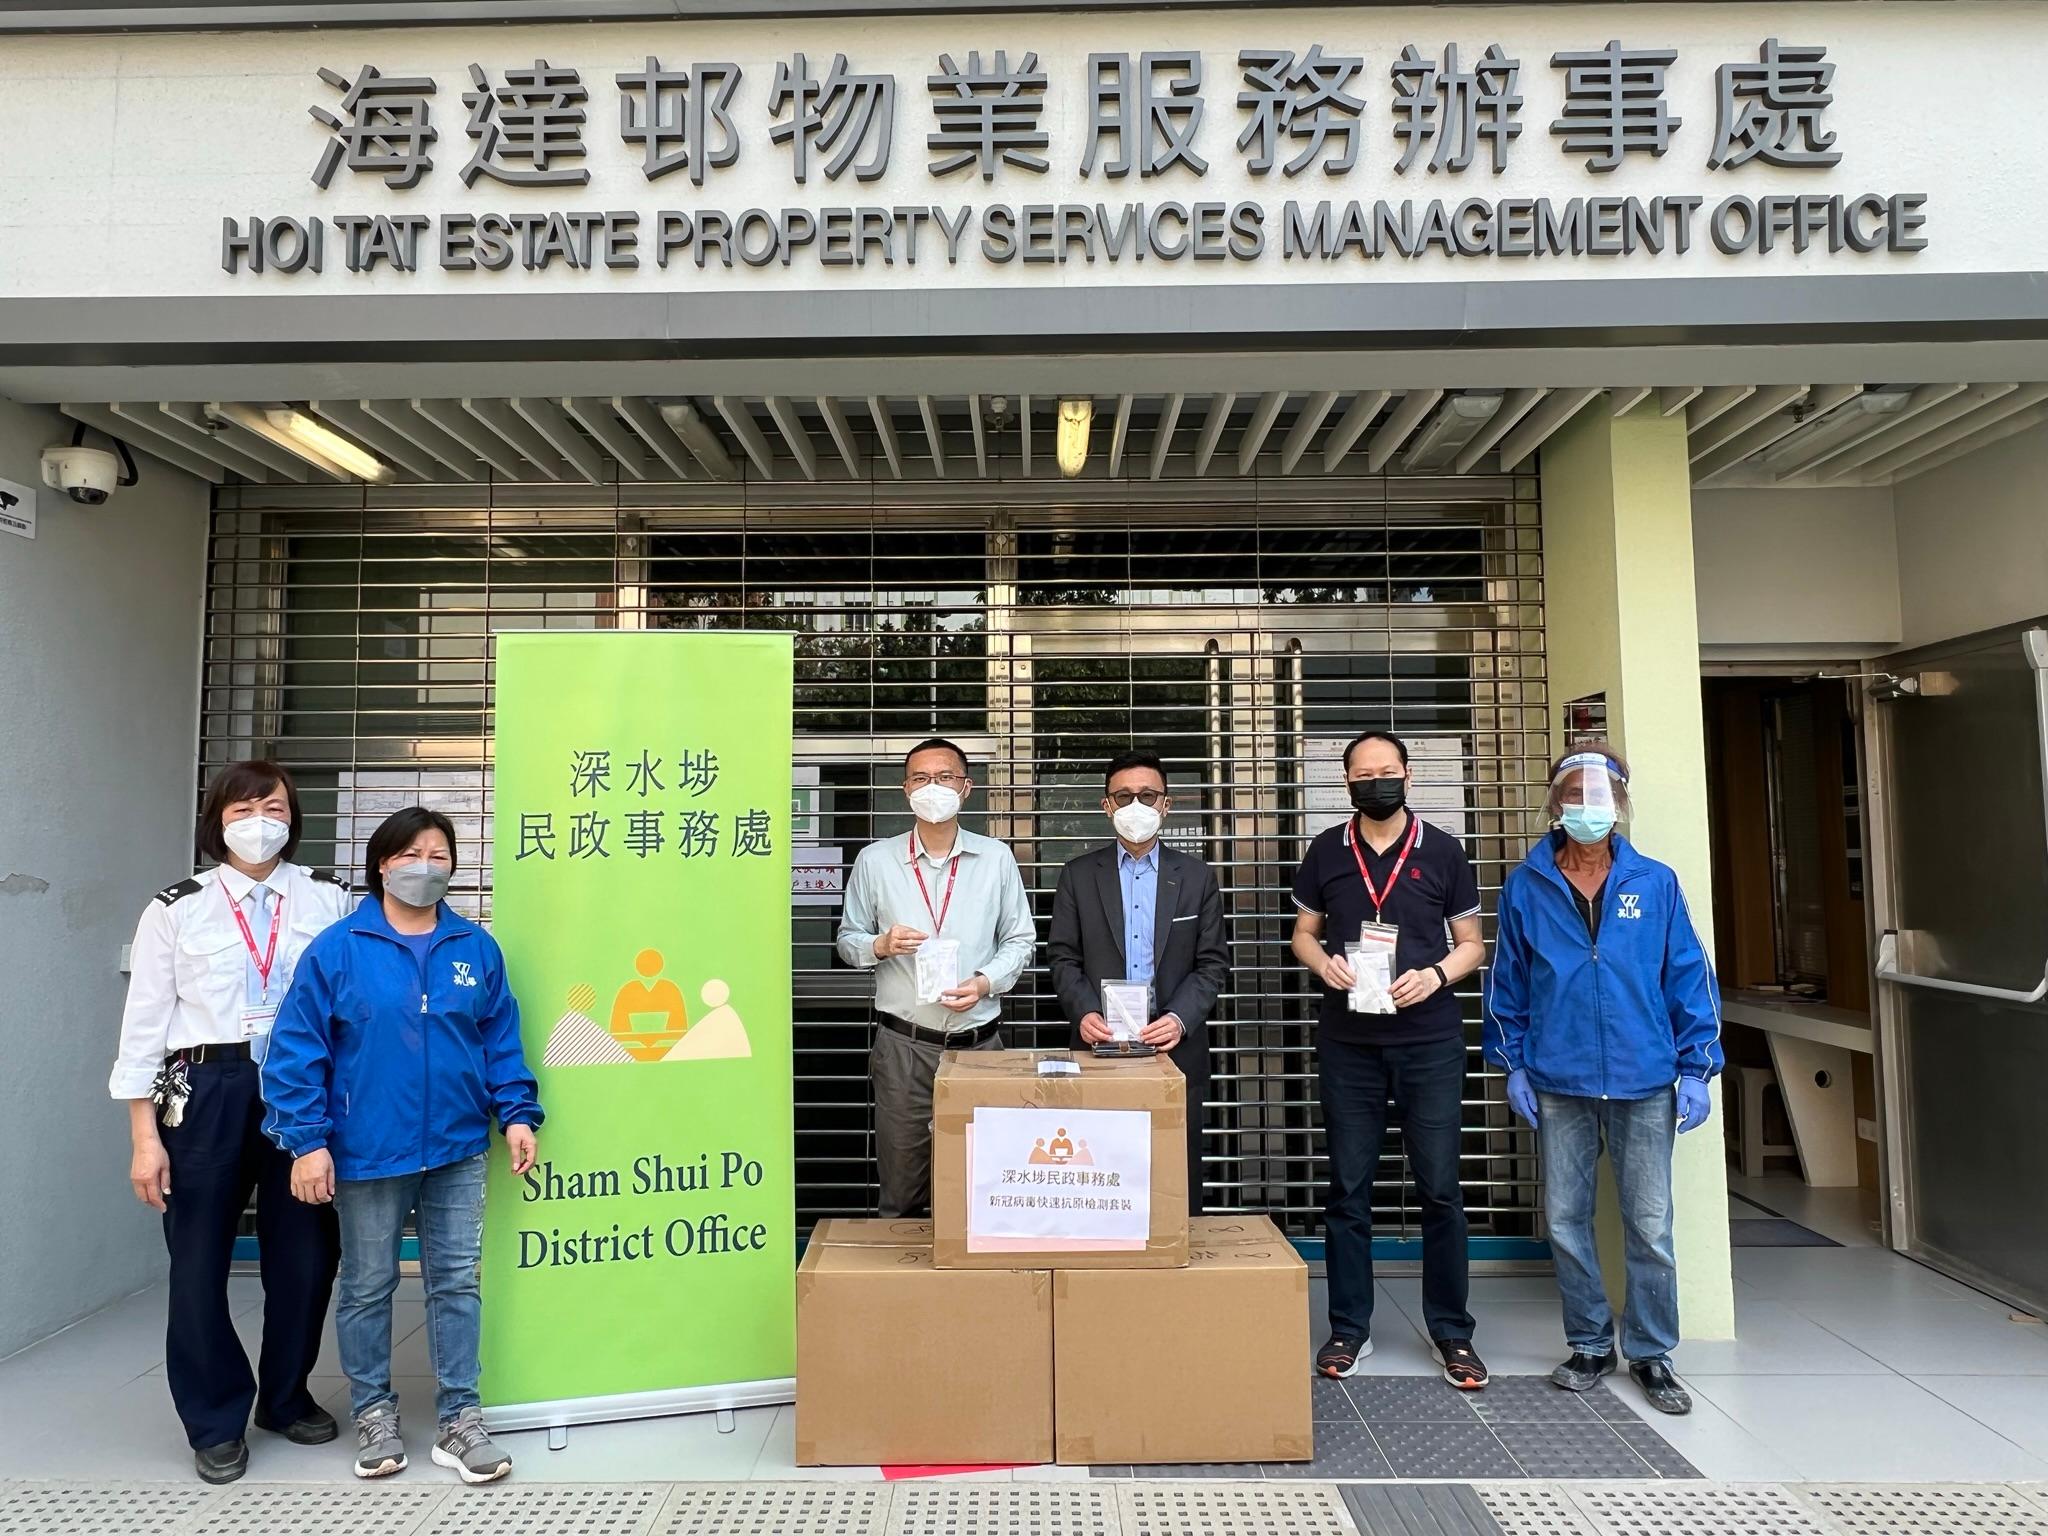 The Sham Shui Po District Office distributed COVID-19 rapid test kits to households, cleansing workers and property management staff living and working in Hoi Tat Estate for voluntary testing through the Housing Department and the property management company today (April 16).